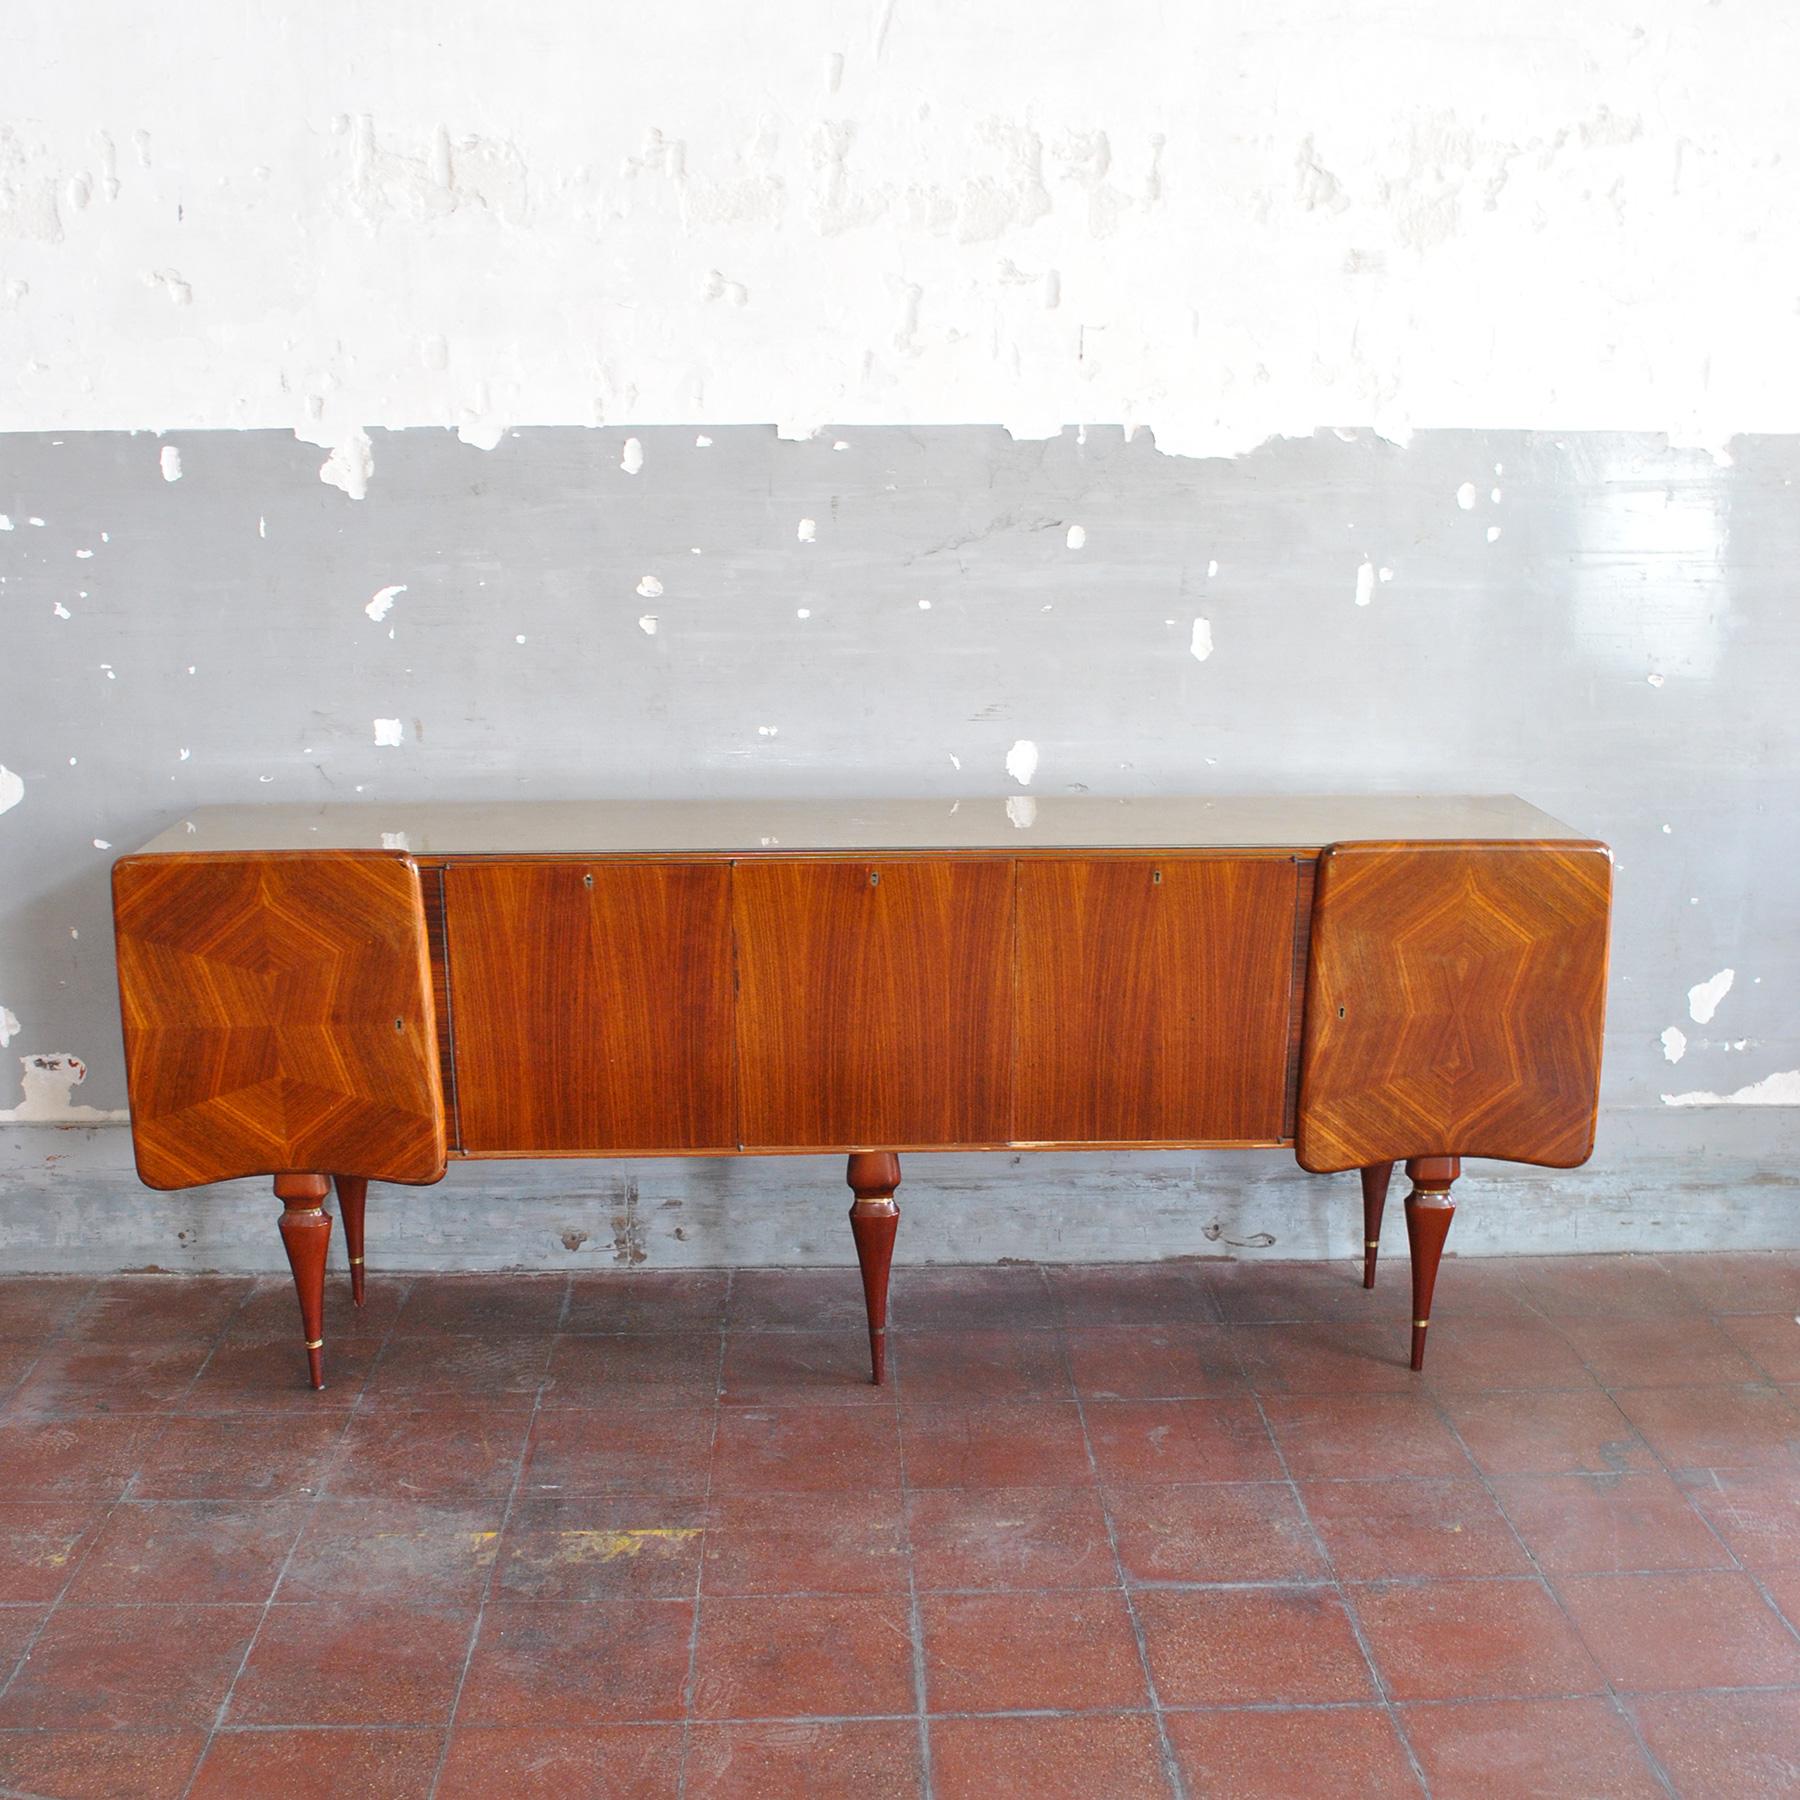 Servant designed with five irregular doors, Italian style from the 1960s Turin school.